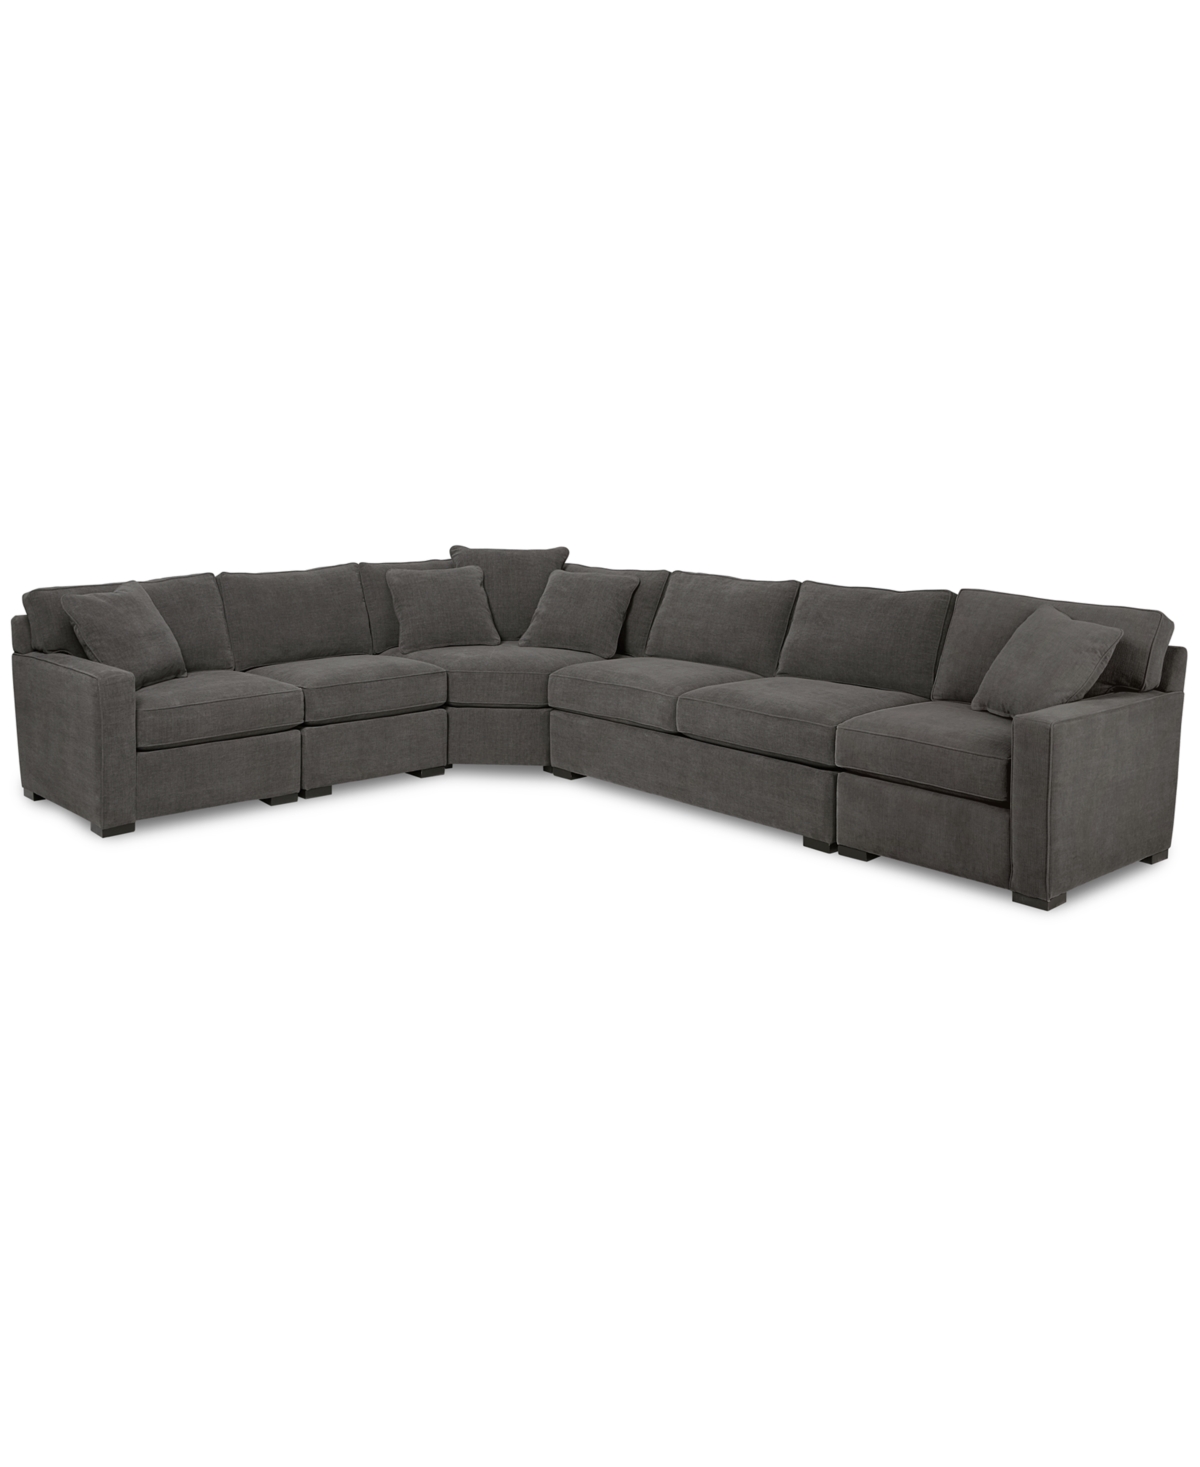 1101387 Radley 5-Pc Fabric Sectional with Apartment Sofa,  sku 1101387